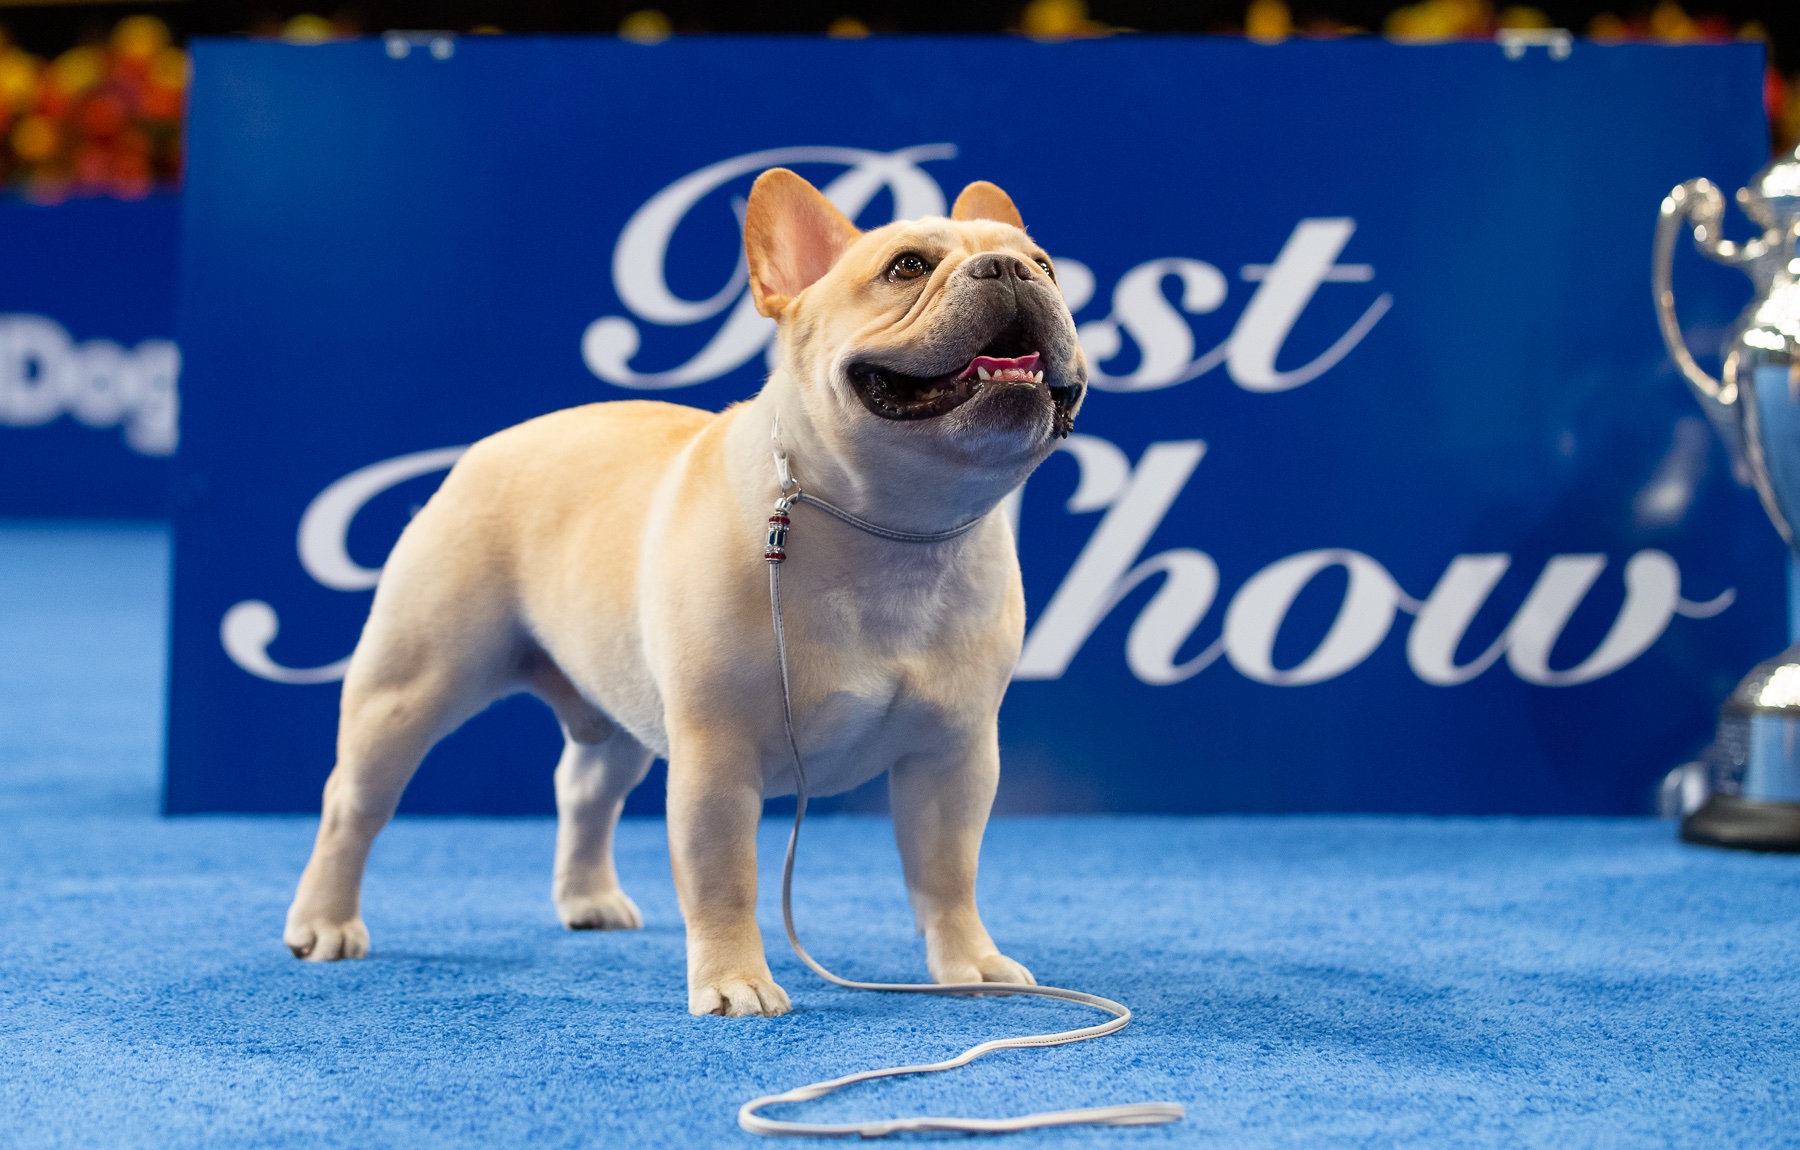 Florida Dog Show Competition - 2022